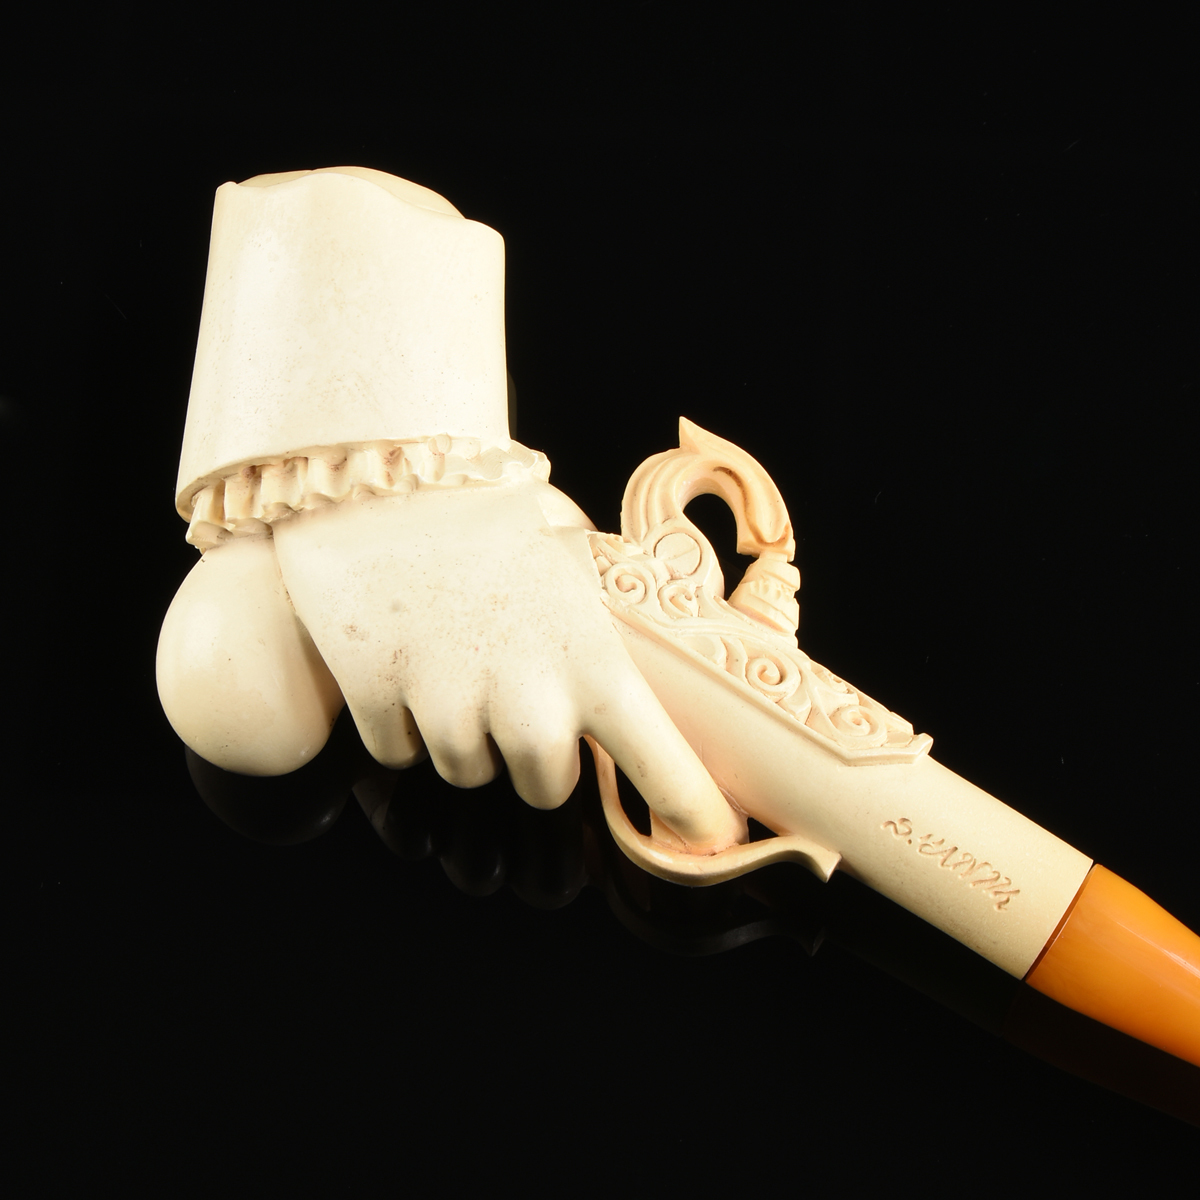 A GROUP OF THREE MEERSCHAUM TOBACCO PIPES, LATE 19TH/EARLY 20TH CENTURY, carved in the form of a - Image 4 of 9